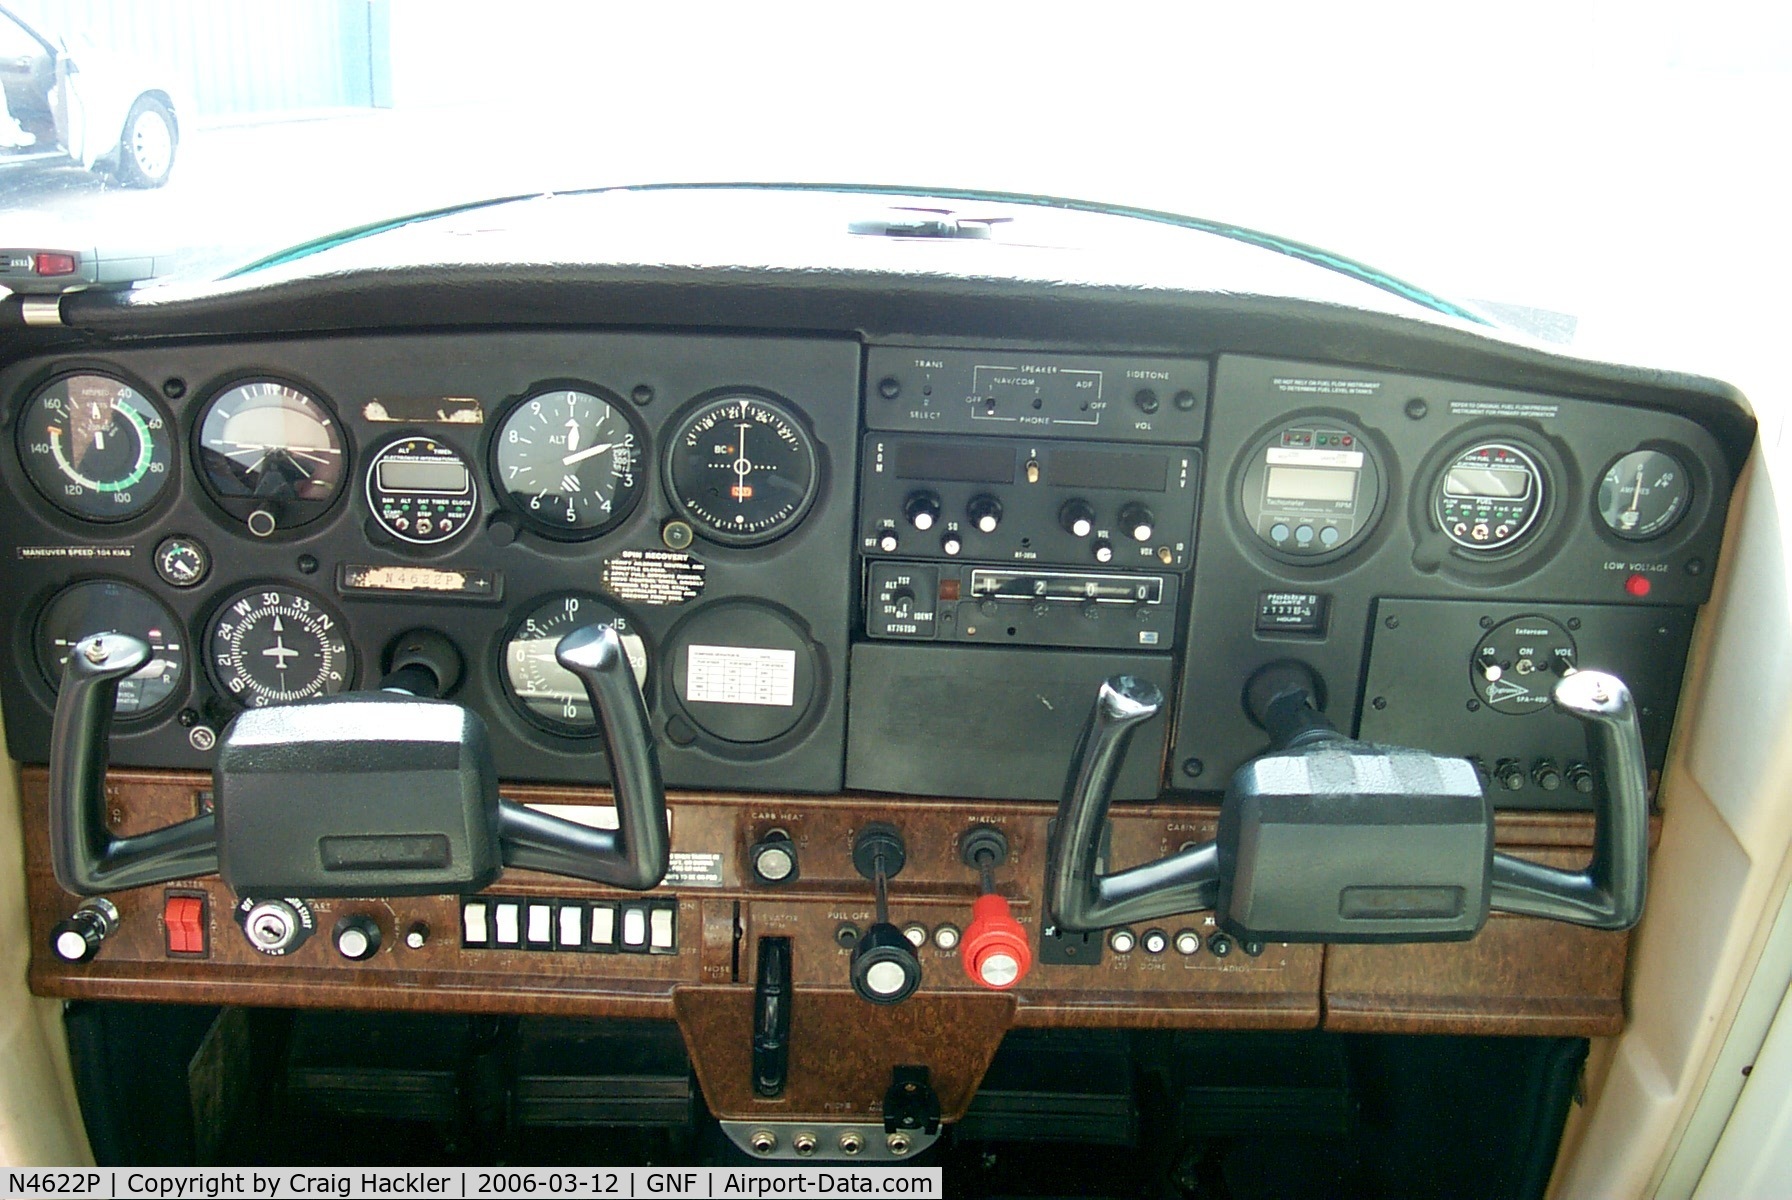 N4622P, 1980 Cessna 152 C/N 15284785, Fairly well-equipped